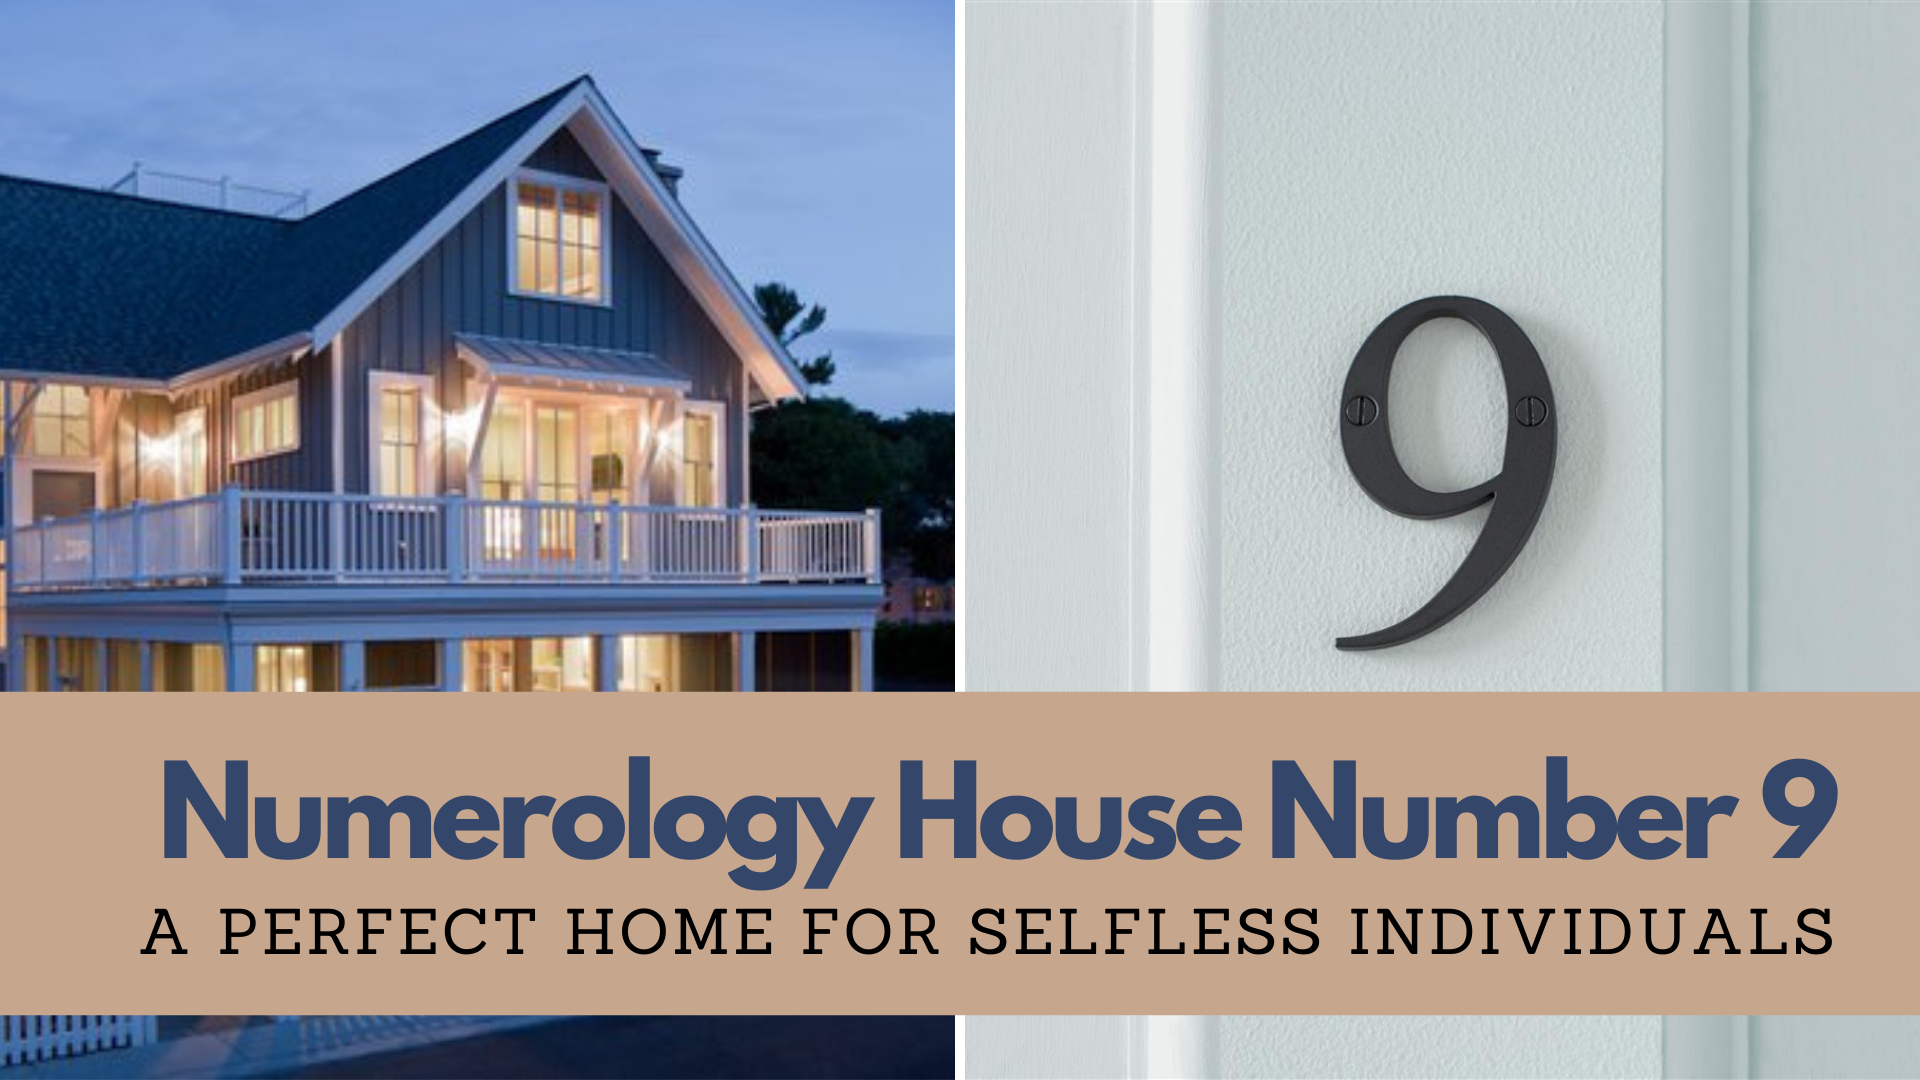 Numerology House Number 9 - A Perfect Home For Selfless Individuals